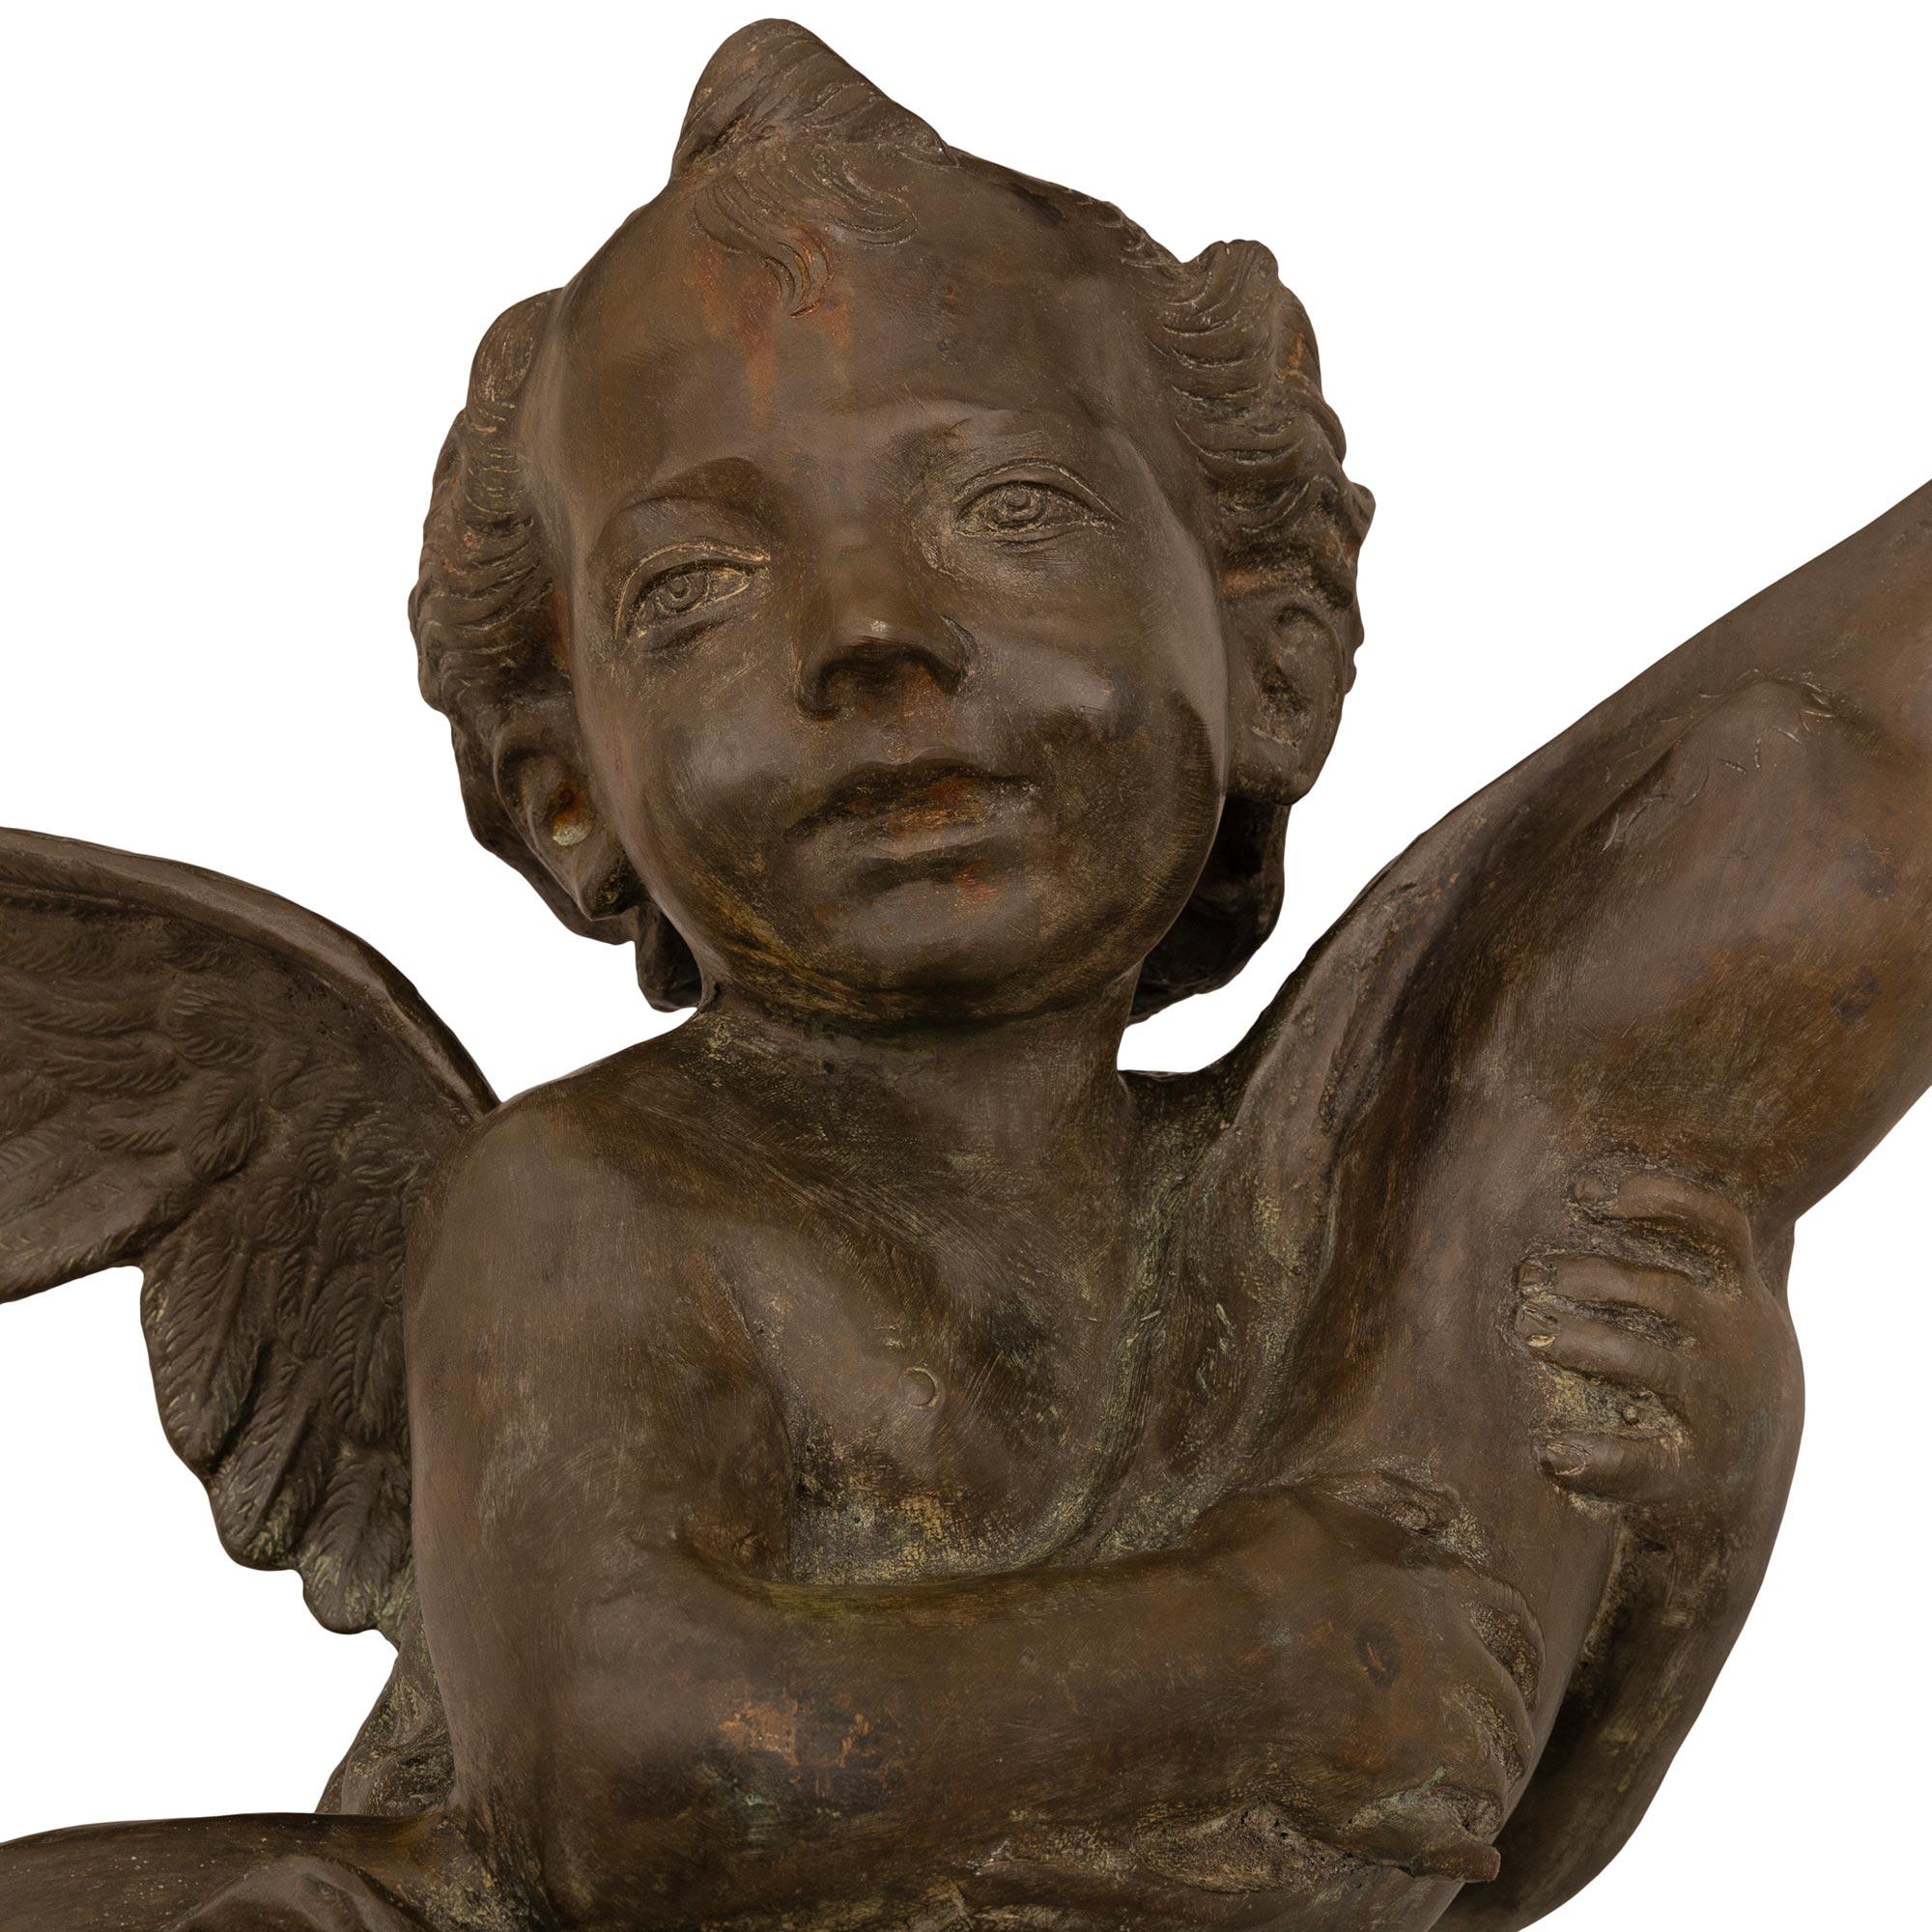 A beautiful and most charming French 19th century cast iron fountain of a young boy holding a dolphin. The fountain is raised on an octagonal base and an elegant dome shaped support. The charming young boy displays finely detailed wings on his back